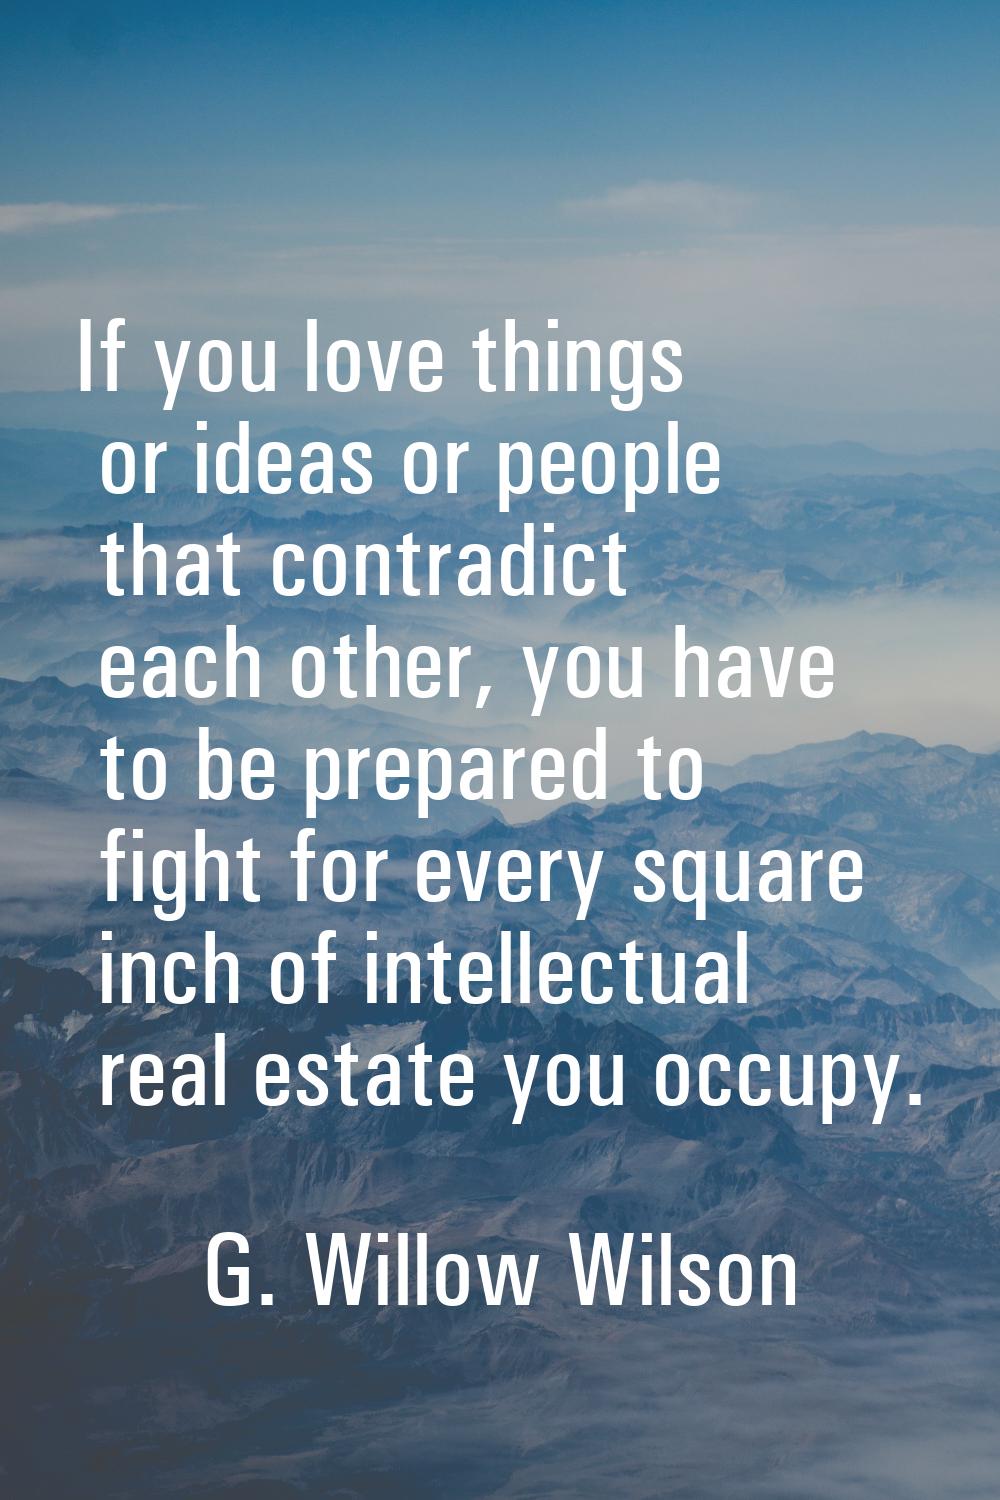 If you love things or ideas or people that contradict each other, you have to be prepared to fight 